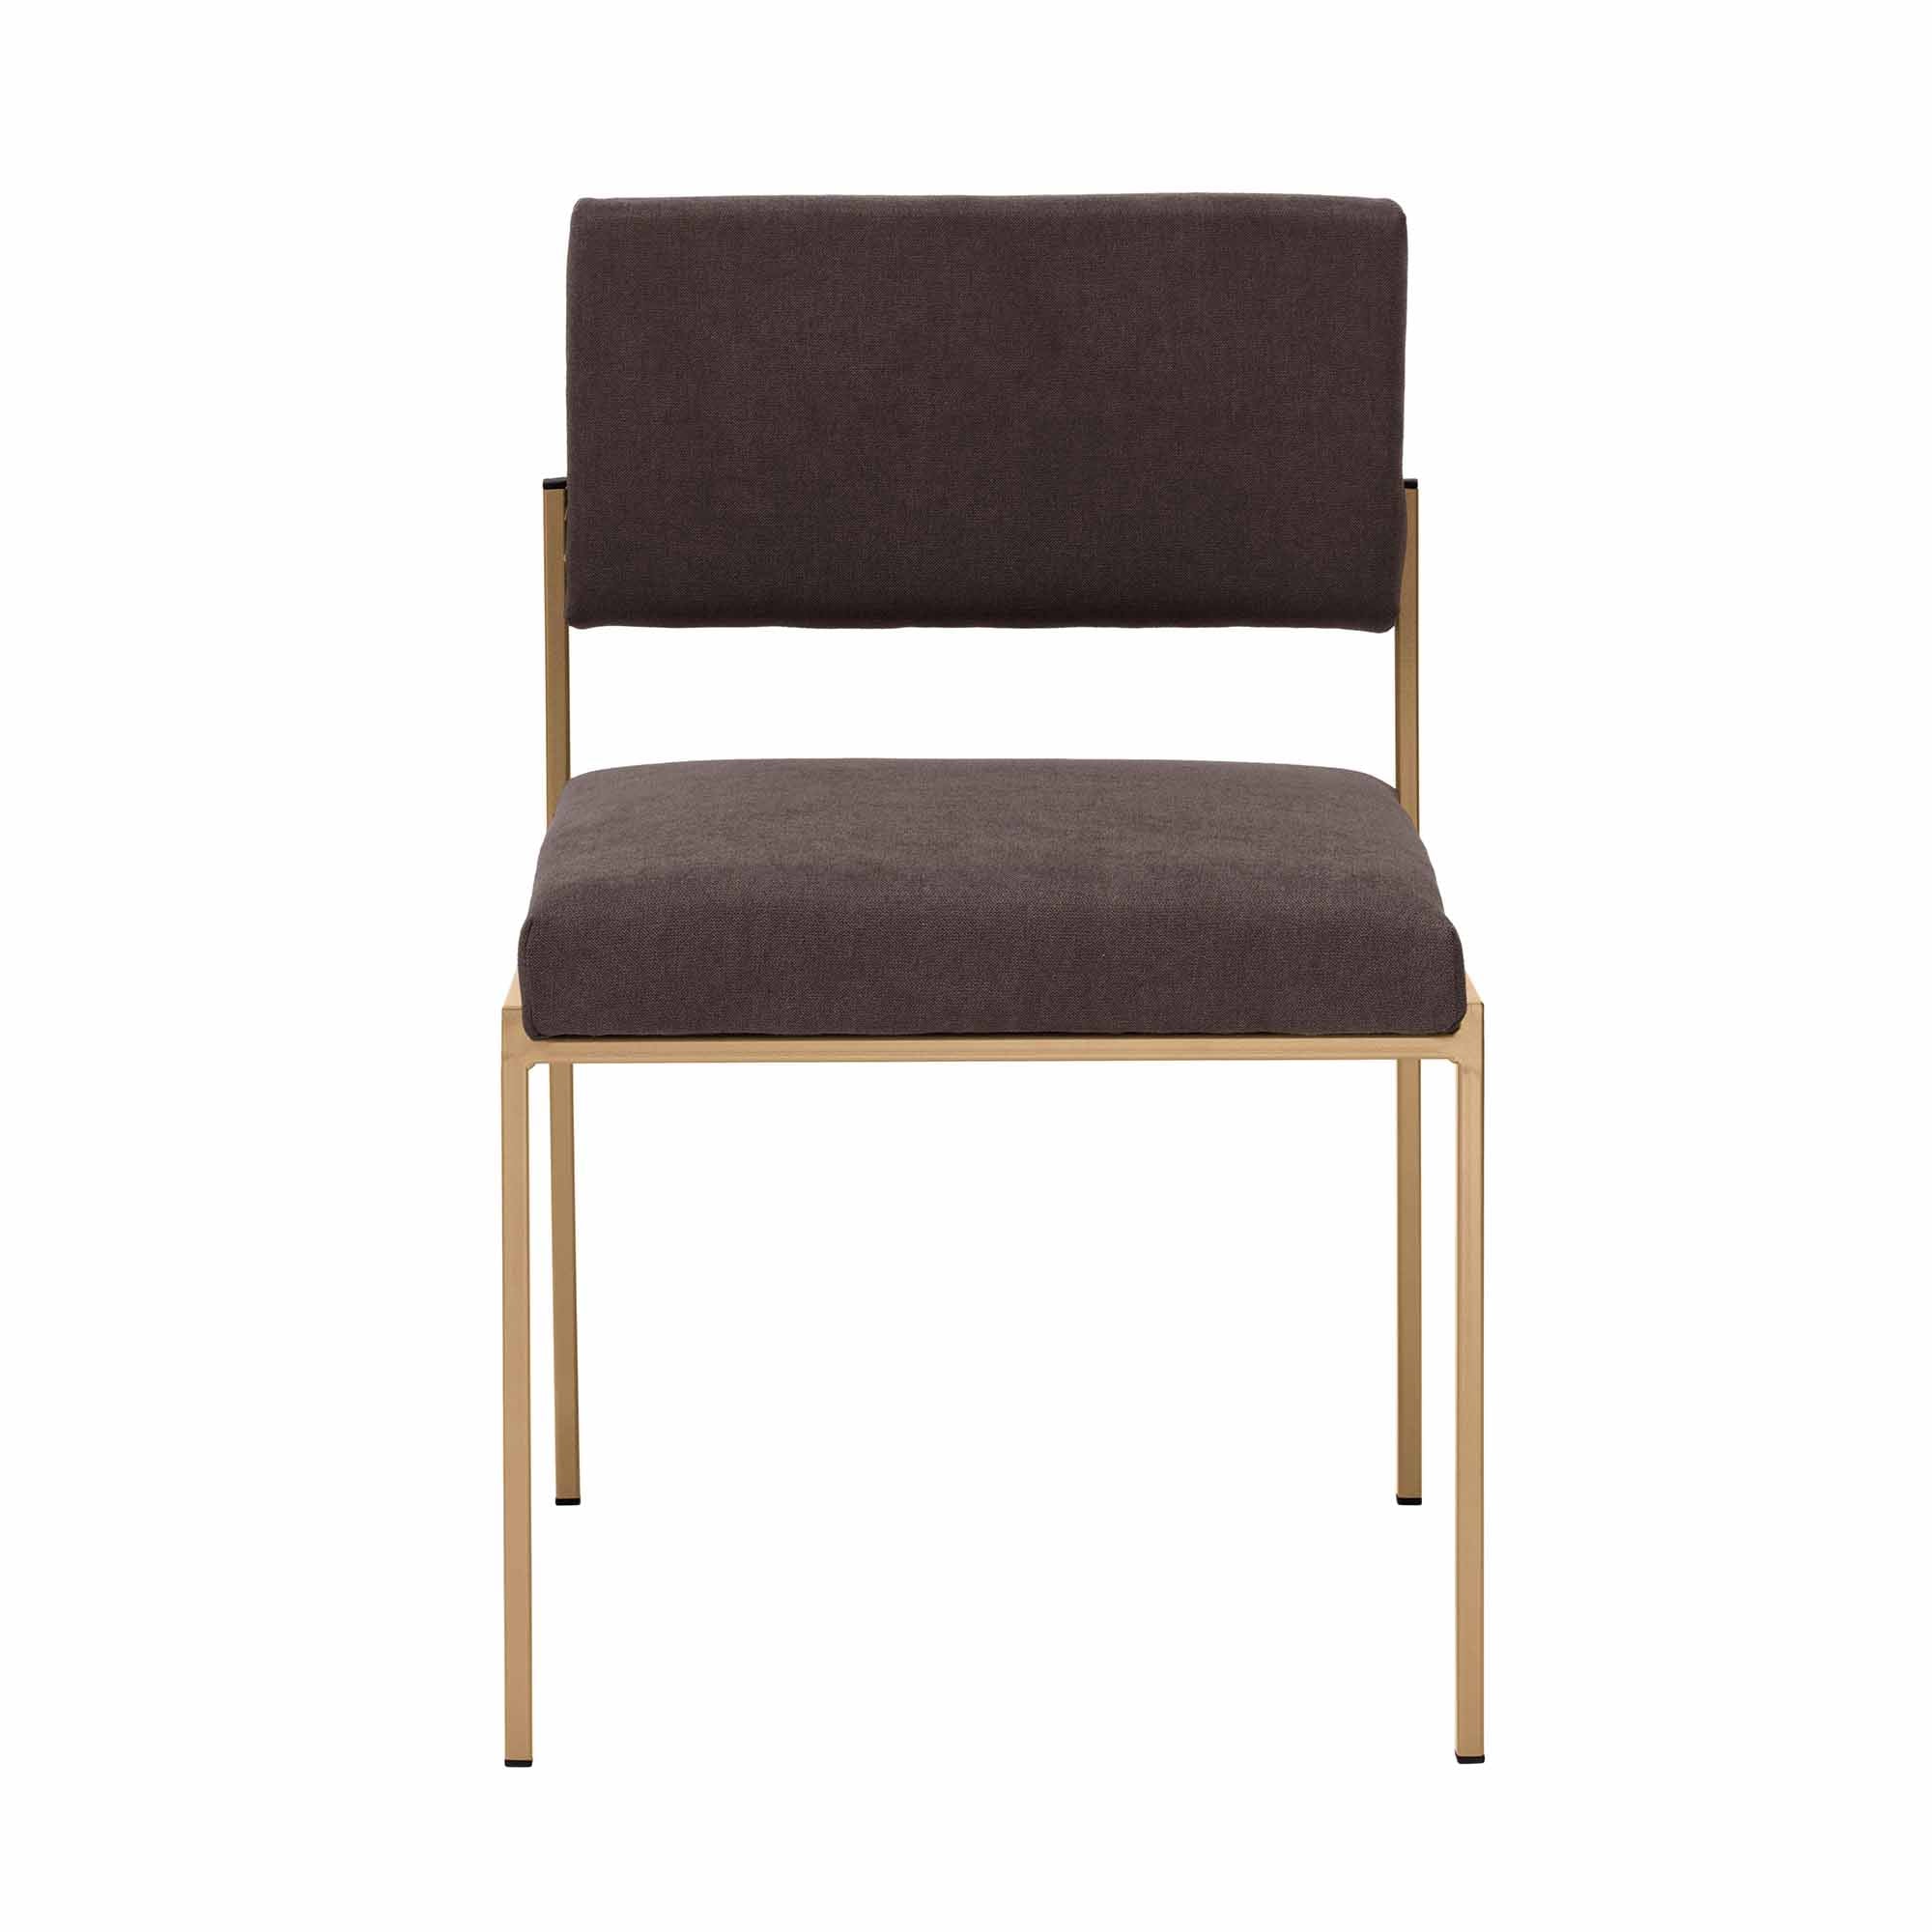  Chair, Powder-Coated Steel Frame, front view, brown fabric, yellow frame